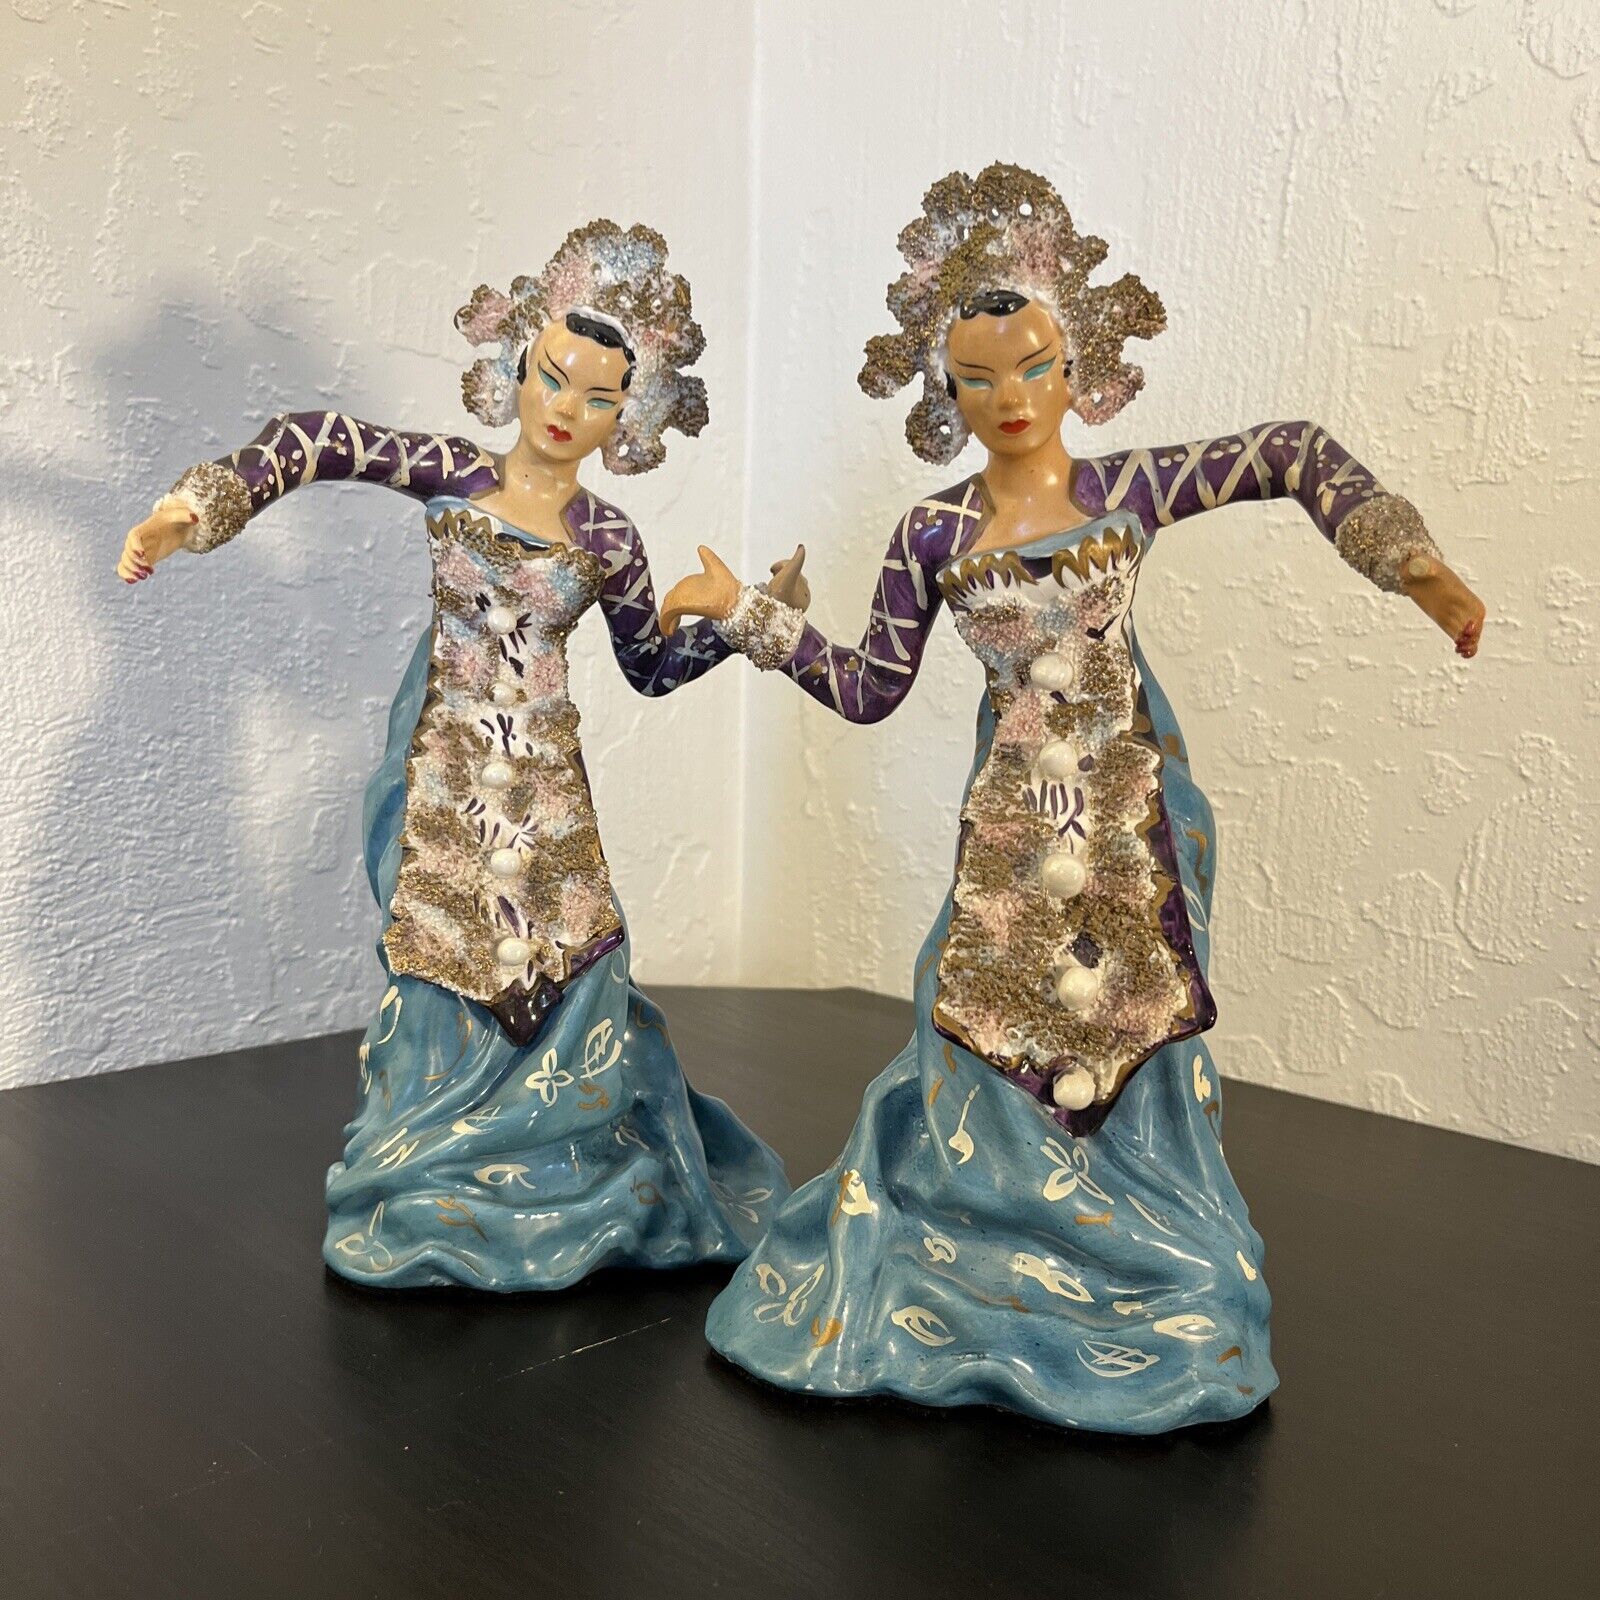 VINTAGE Kathi Urbach Mid-Centry Balinese Dancer Pair 1950\'s Ceramic Statuettes